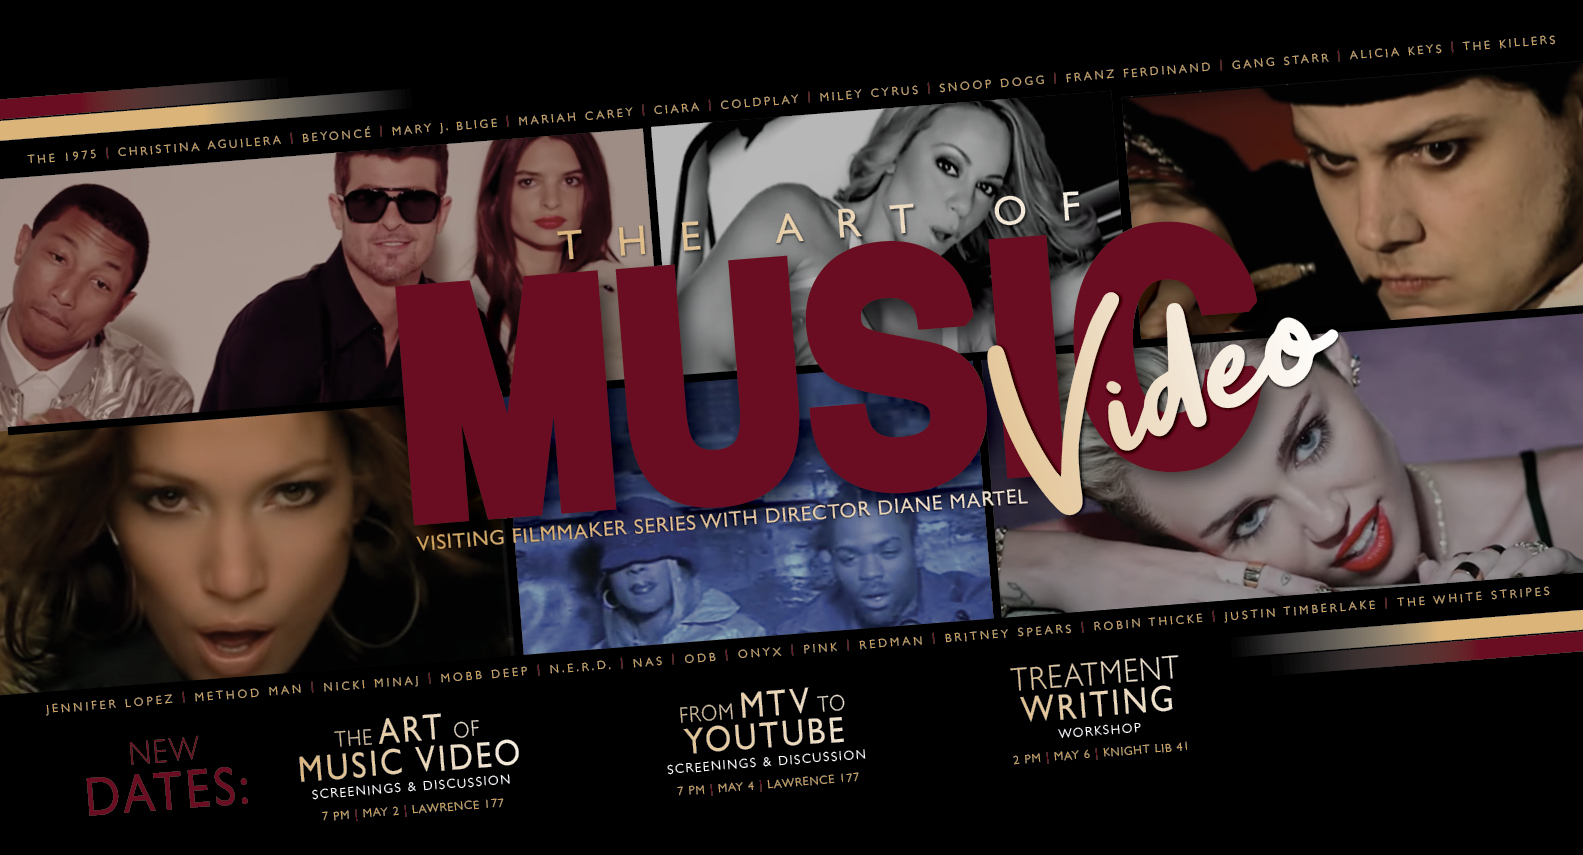 "The Art of Music Video" Visiting Filmmaker Series Presents: Screenings, Discussions, and Workshops with Director Diane Martel